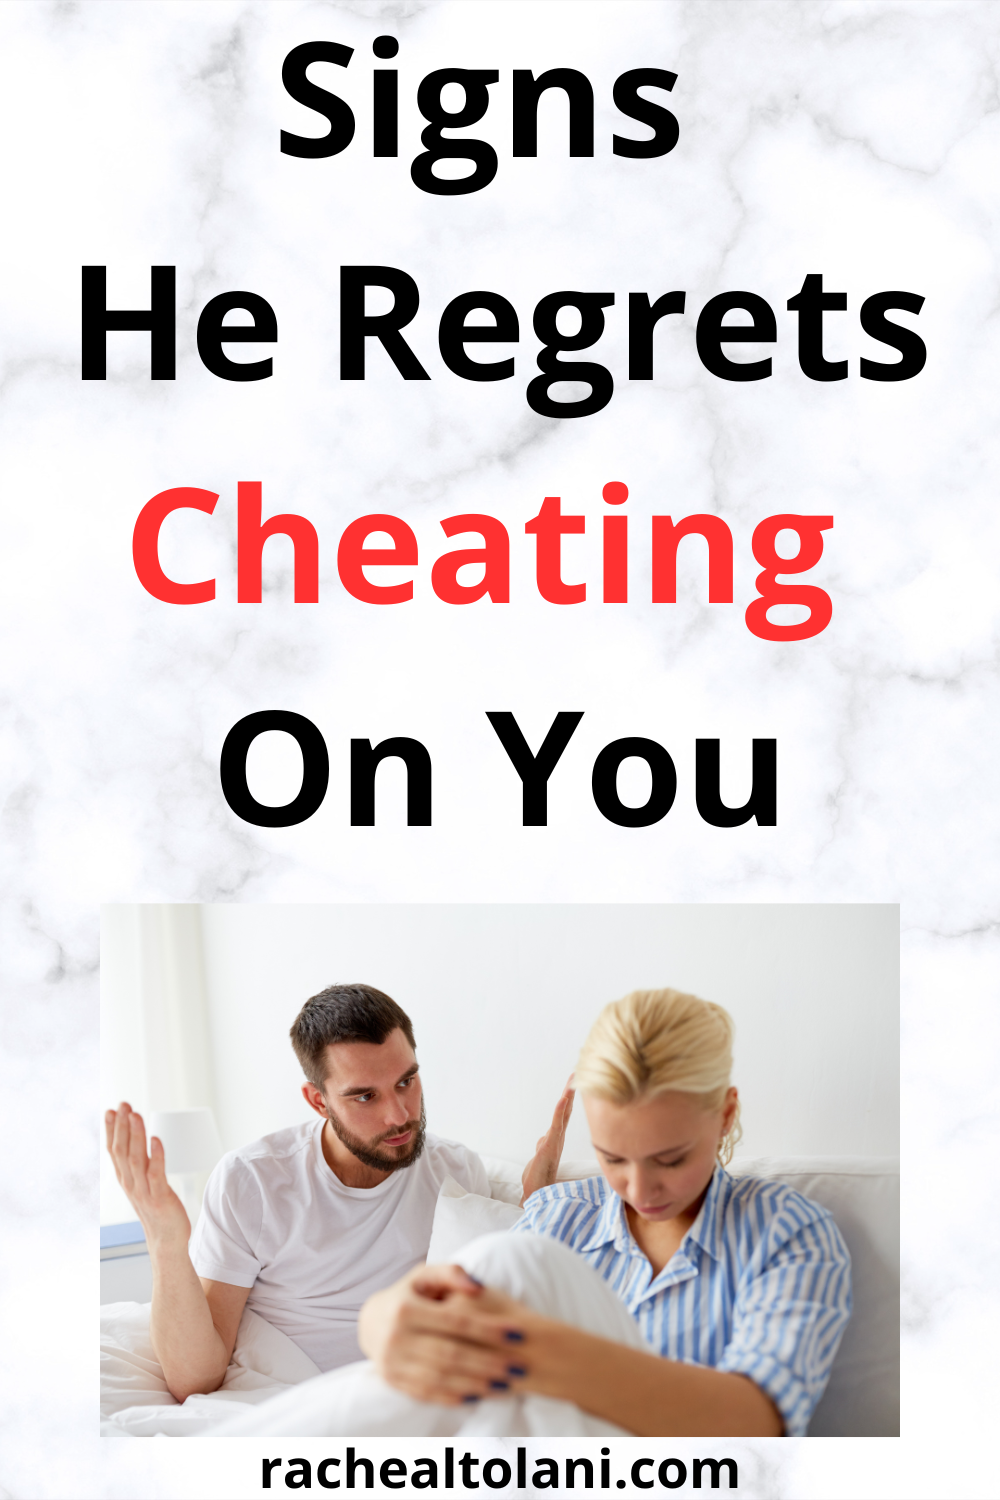 Signs he regrets cheating on you